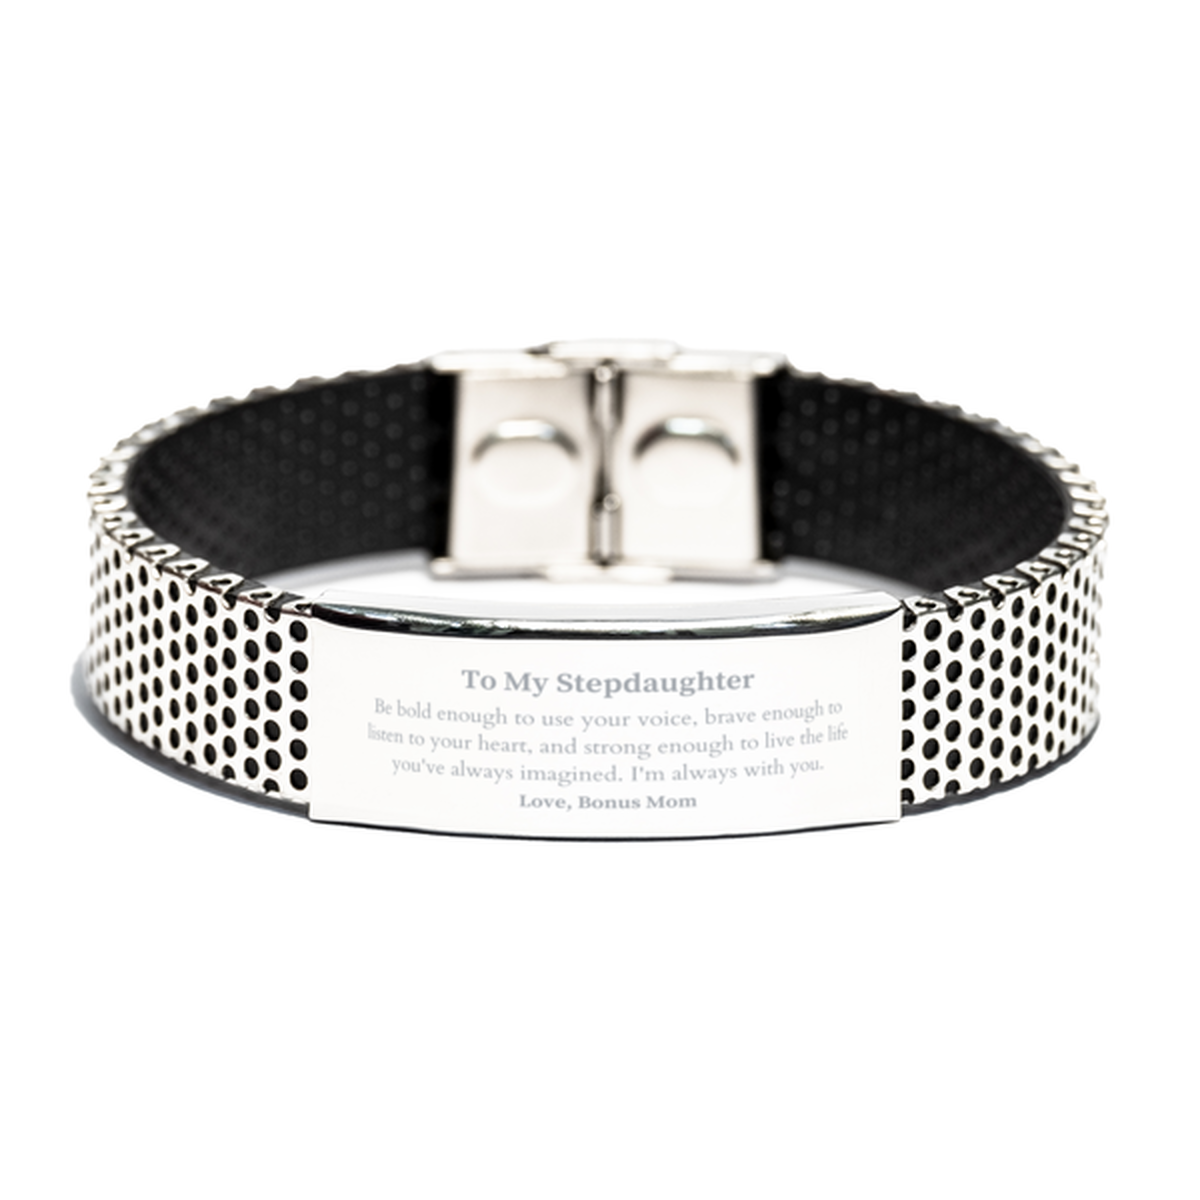 Keepsake Stepdaughter Stainless Steel Bracelet Gift Idea Graduation Christmas Birthday Stepdaughter from Bonus Mom, Stepdaughter Be bold enough to use your voice, brave enough to listen to your heart. Love, Bonus Mom